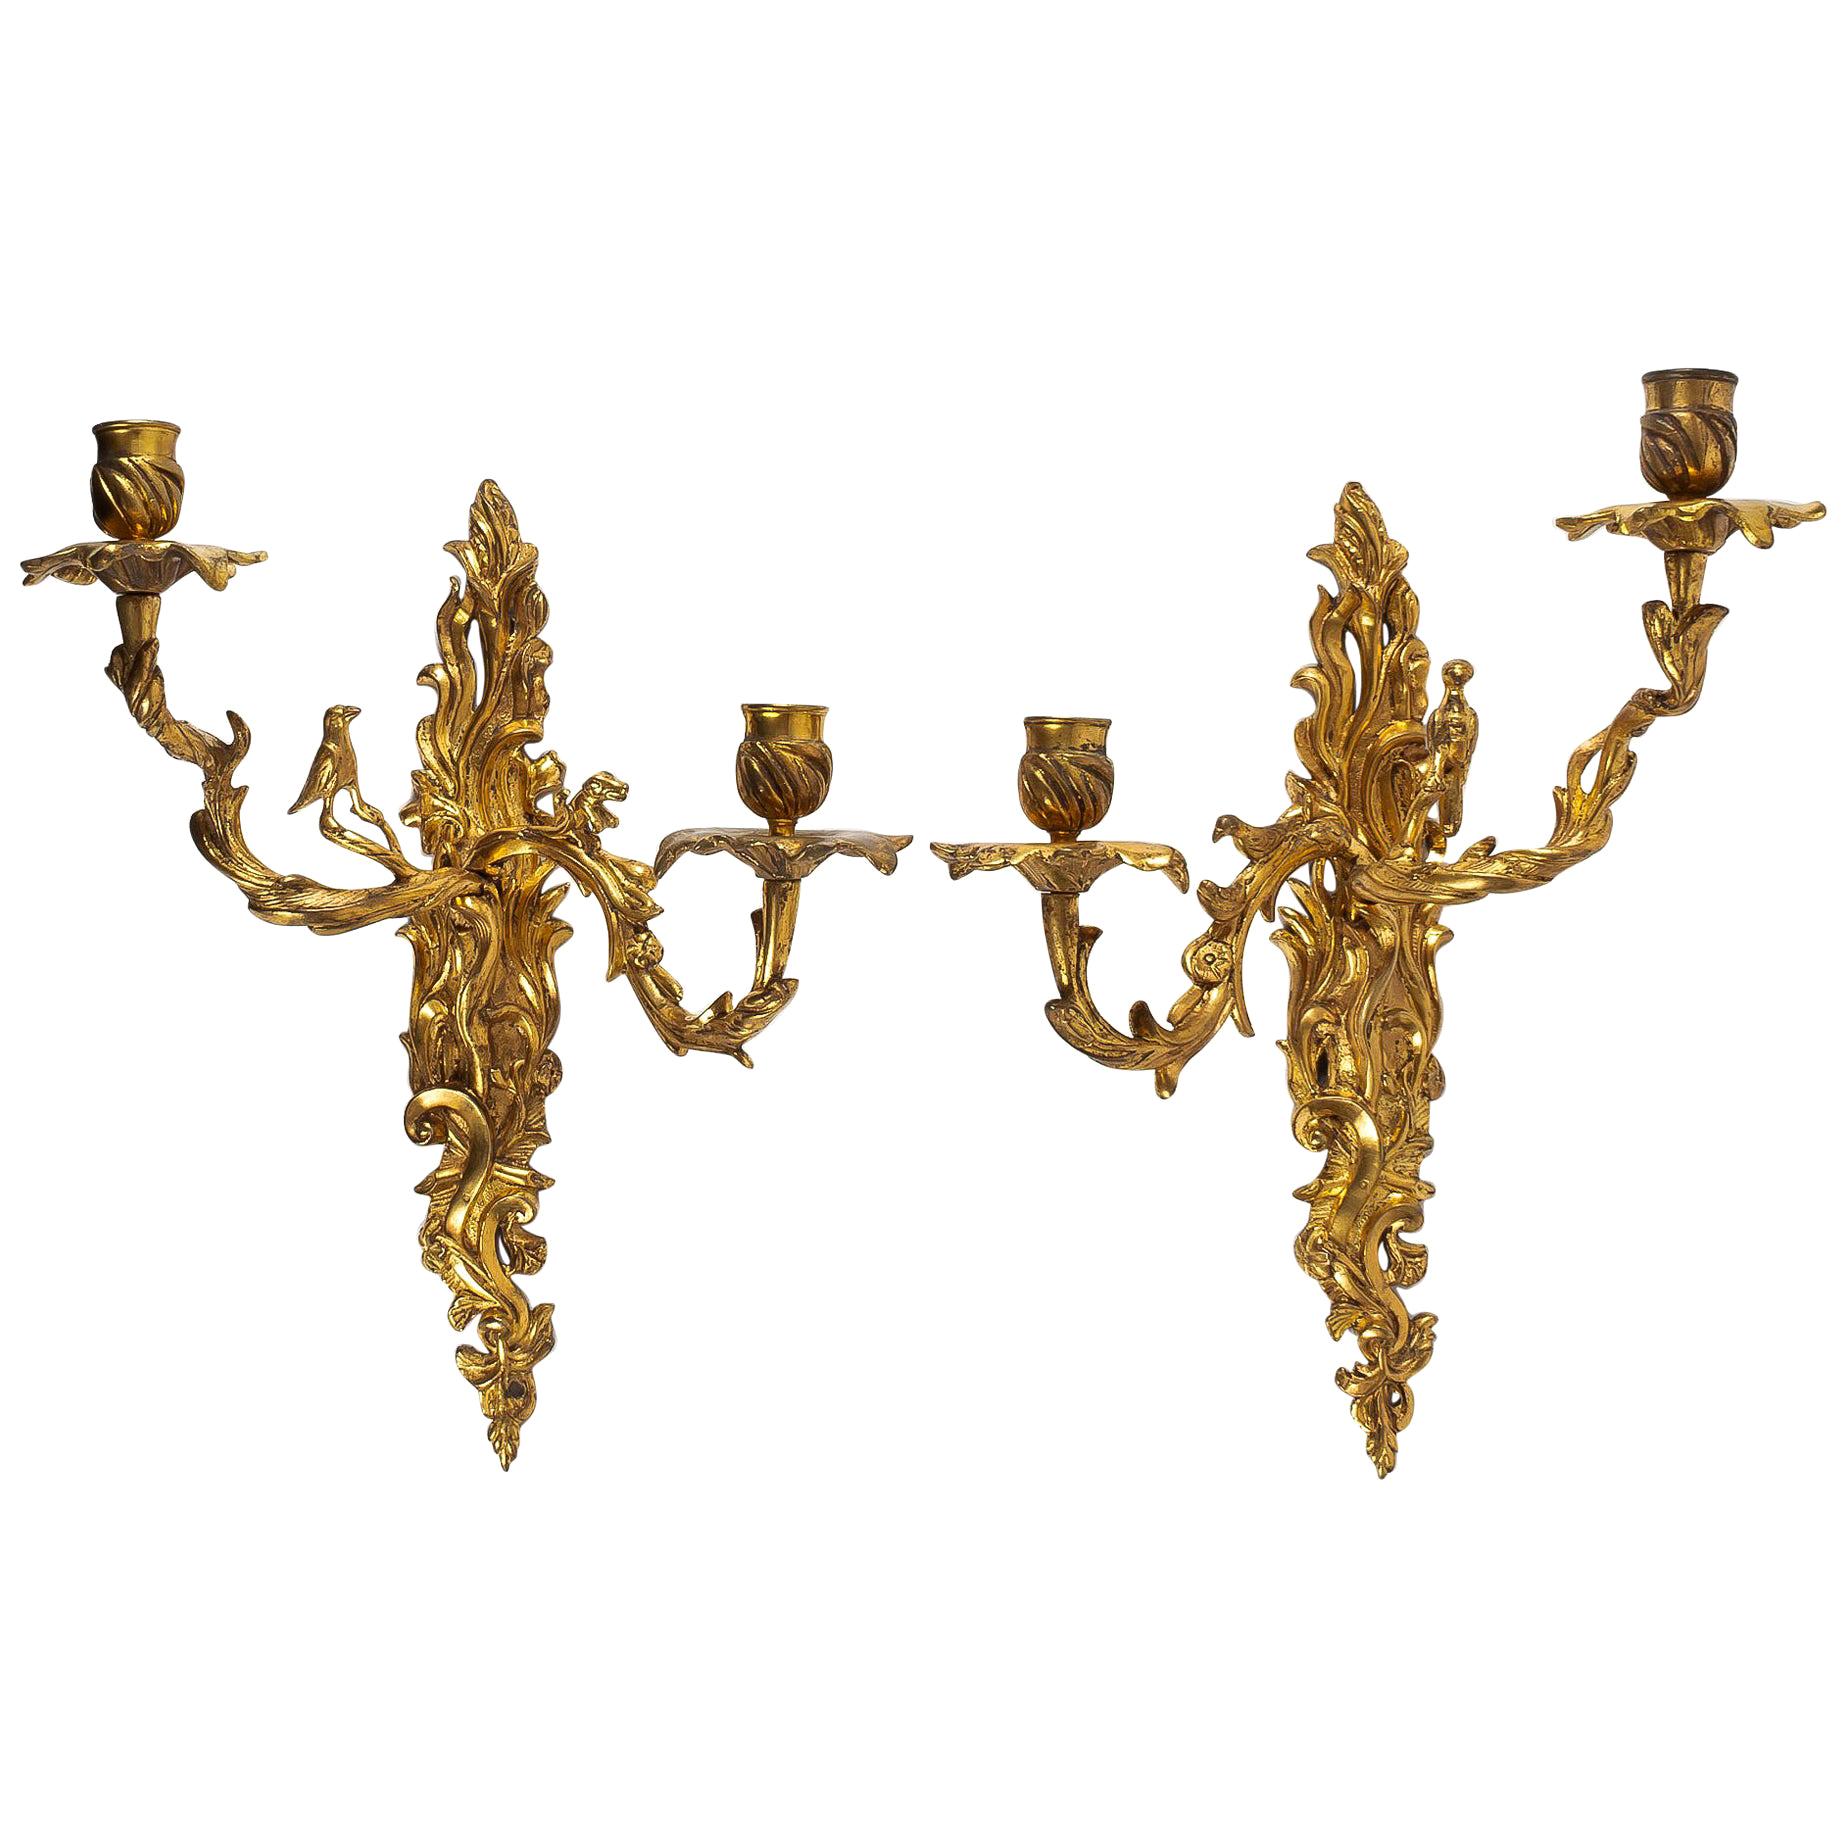 Crowned C Mark, Rare Pair of Hunting Design Ormolu Louis XV Period Sconces For Sale